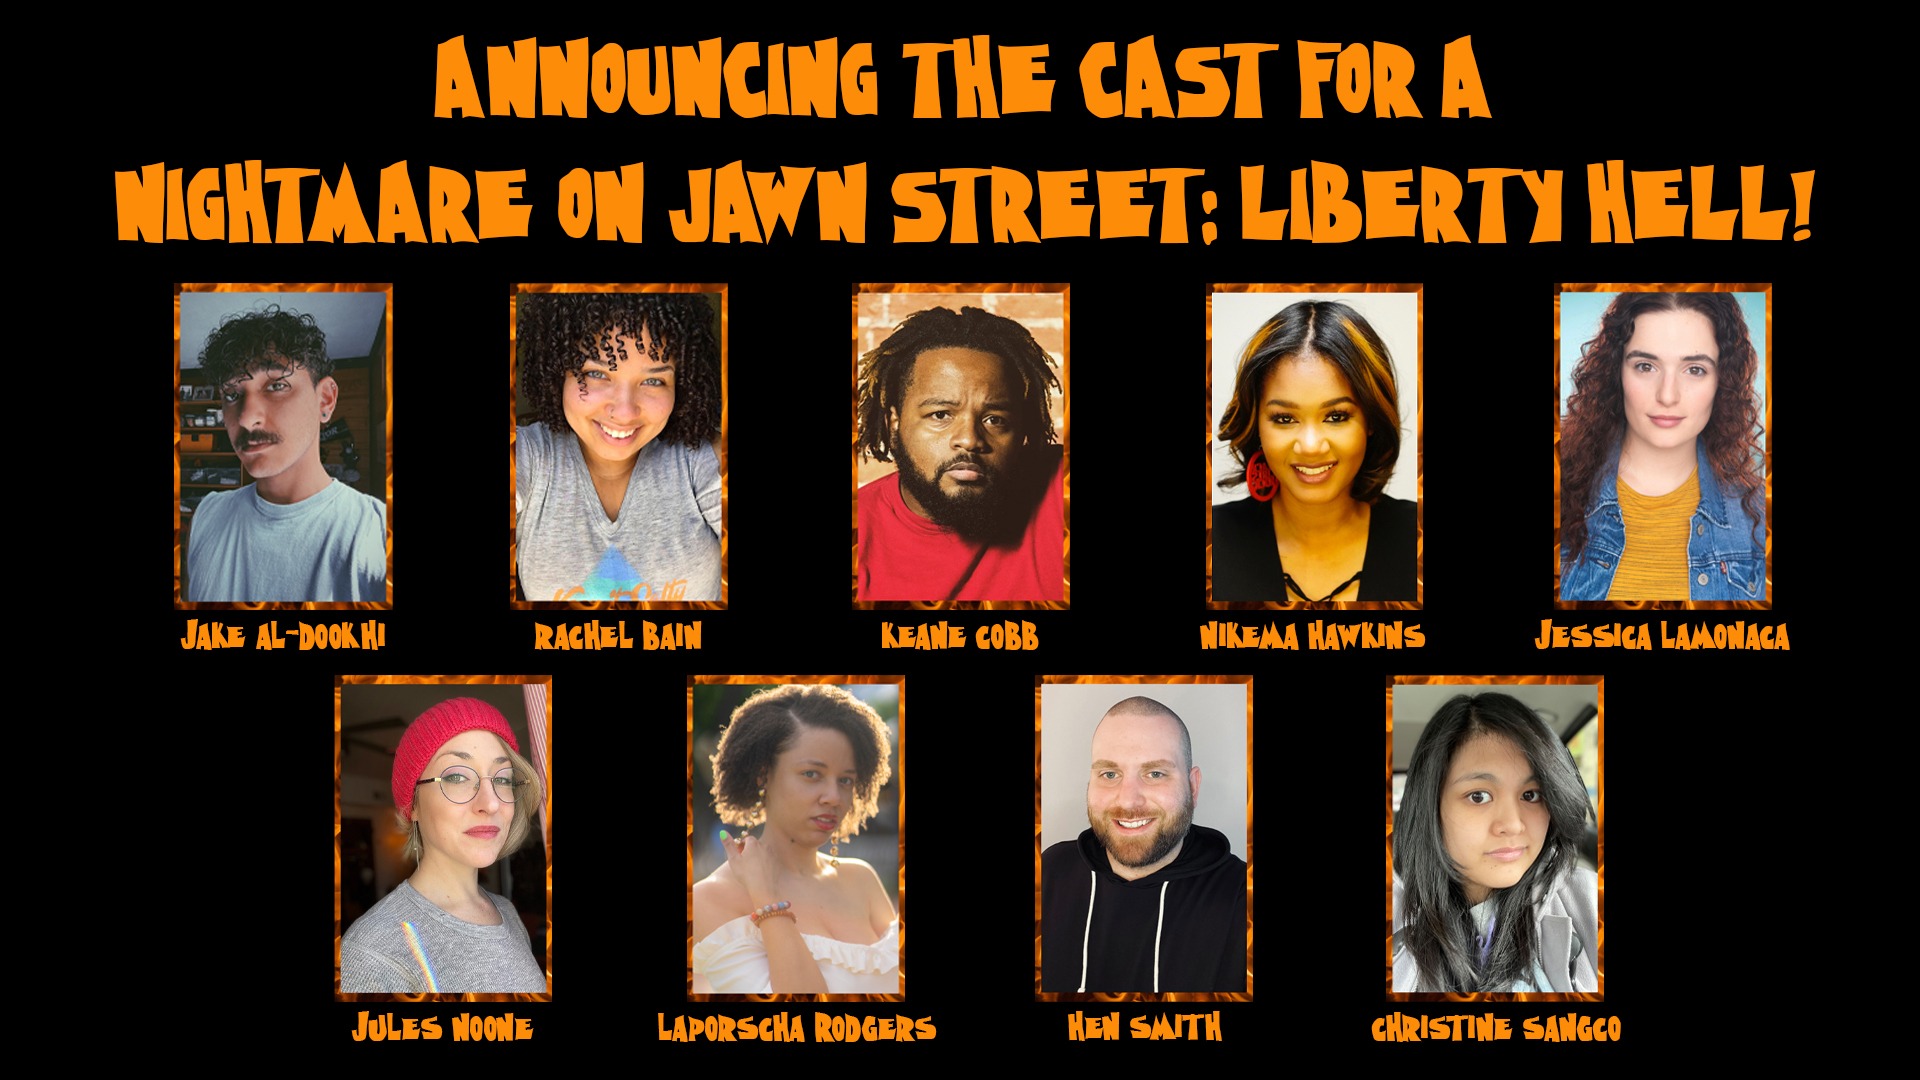 Announcing the Cast for A Nightmare on Jawn Street: Liberty Hell!